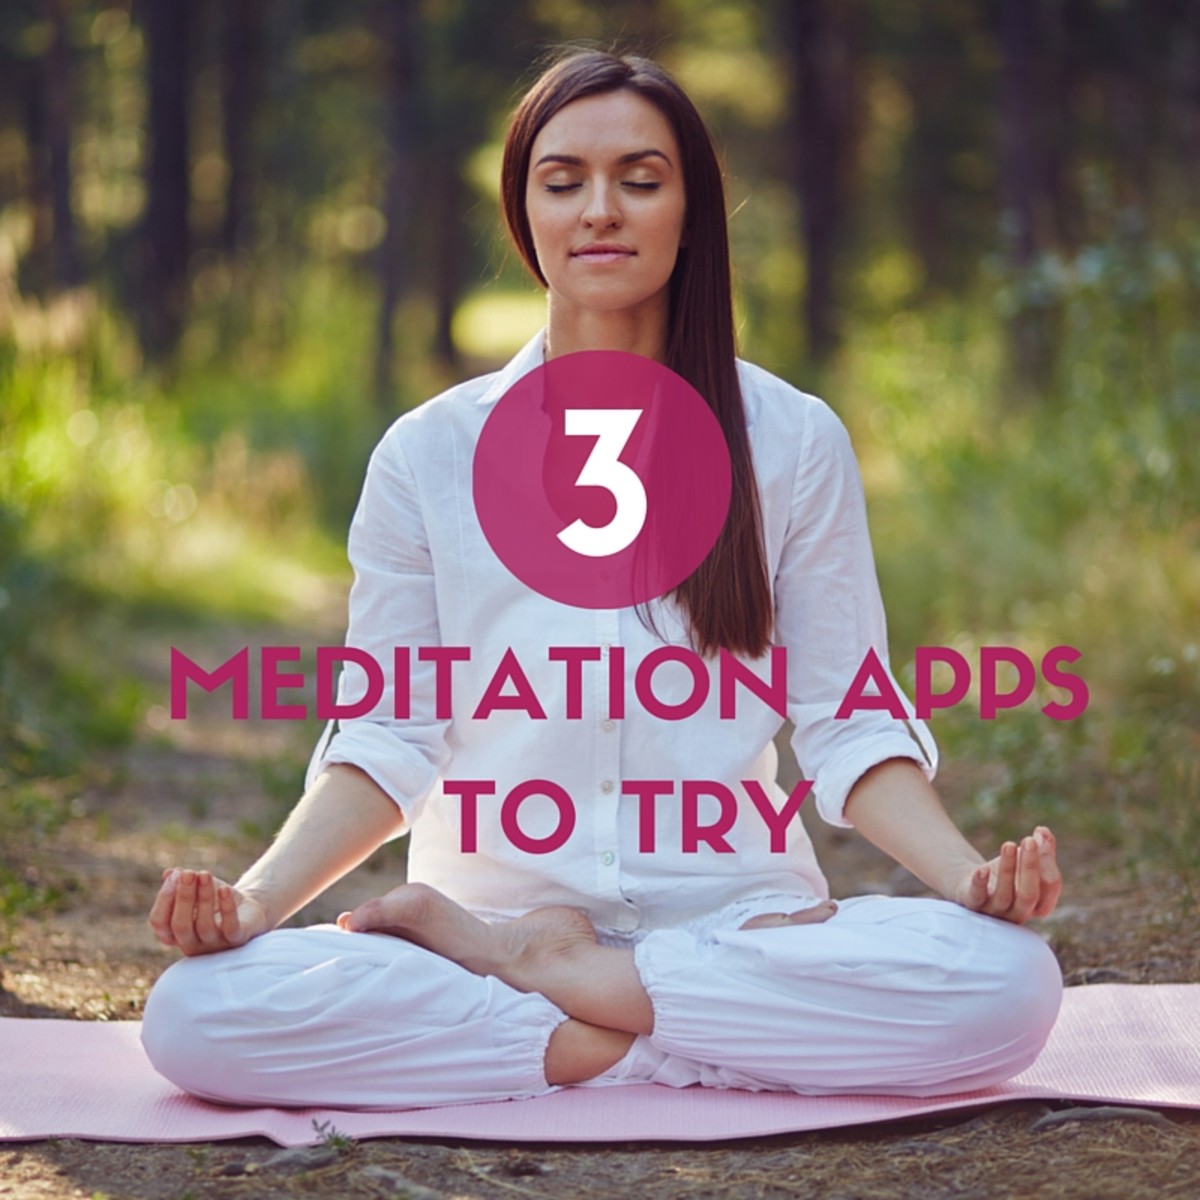 Meditation Apps to Try